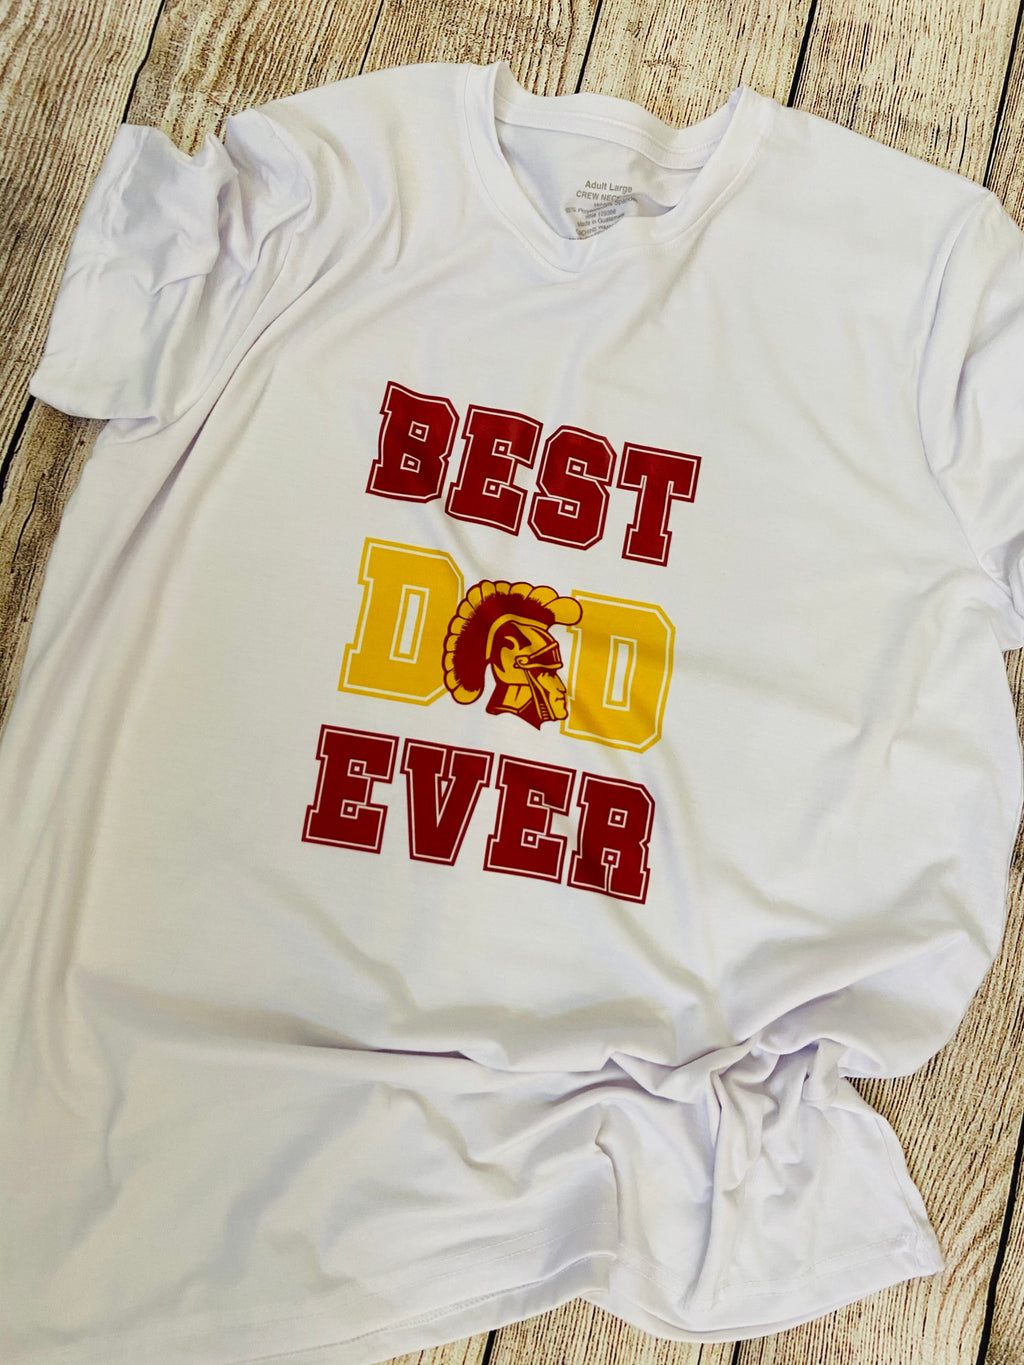 Best Dad Ever USC Inspired